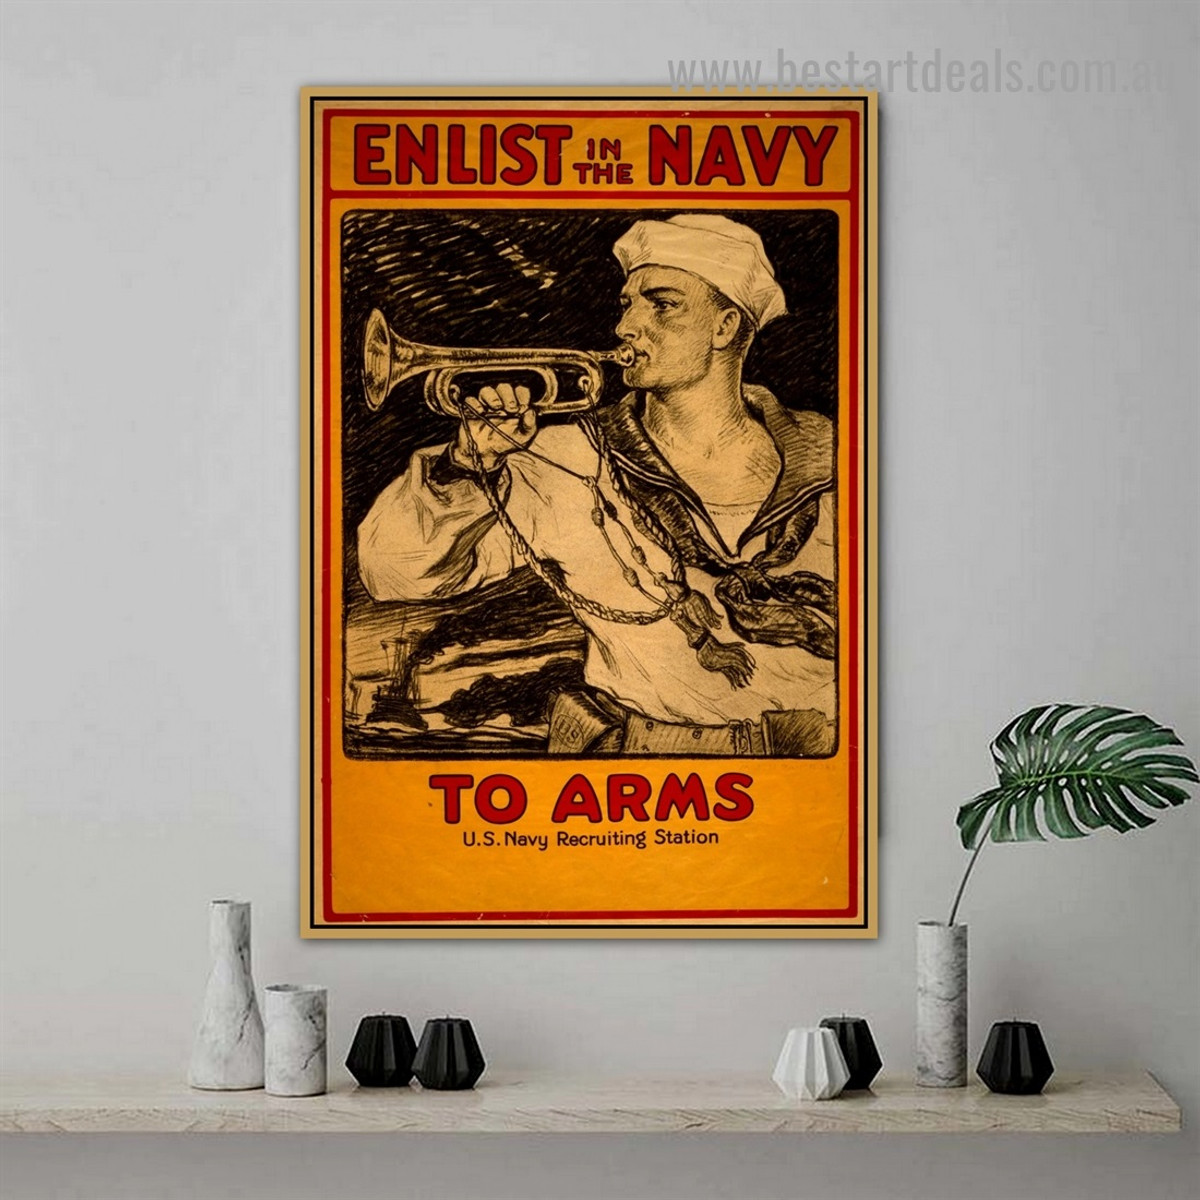 Enlist in the Navy Figure Landscape Retro Advertisement Artwork Photo Canvas Print for Room Wall Décor